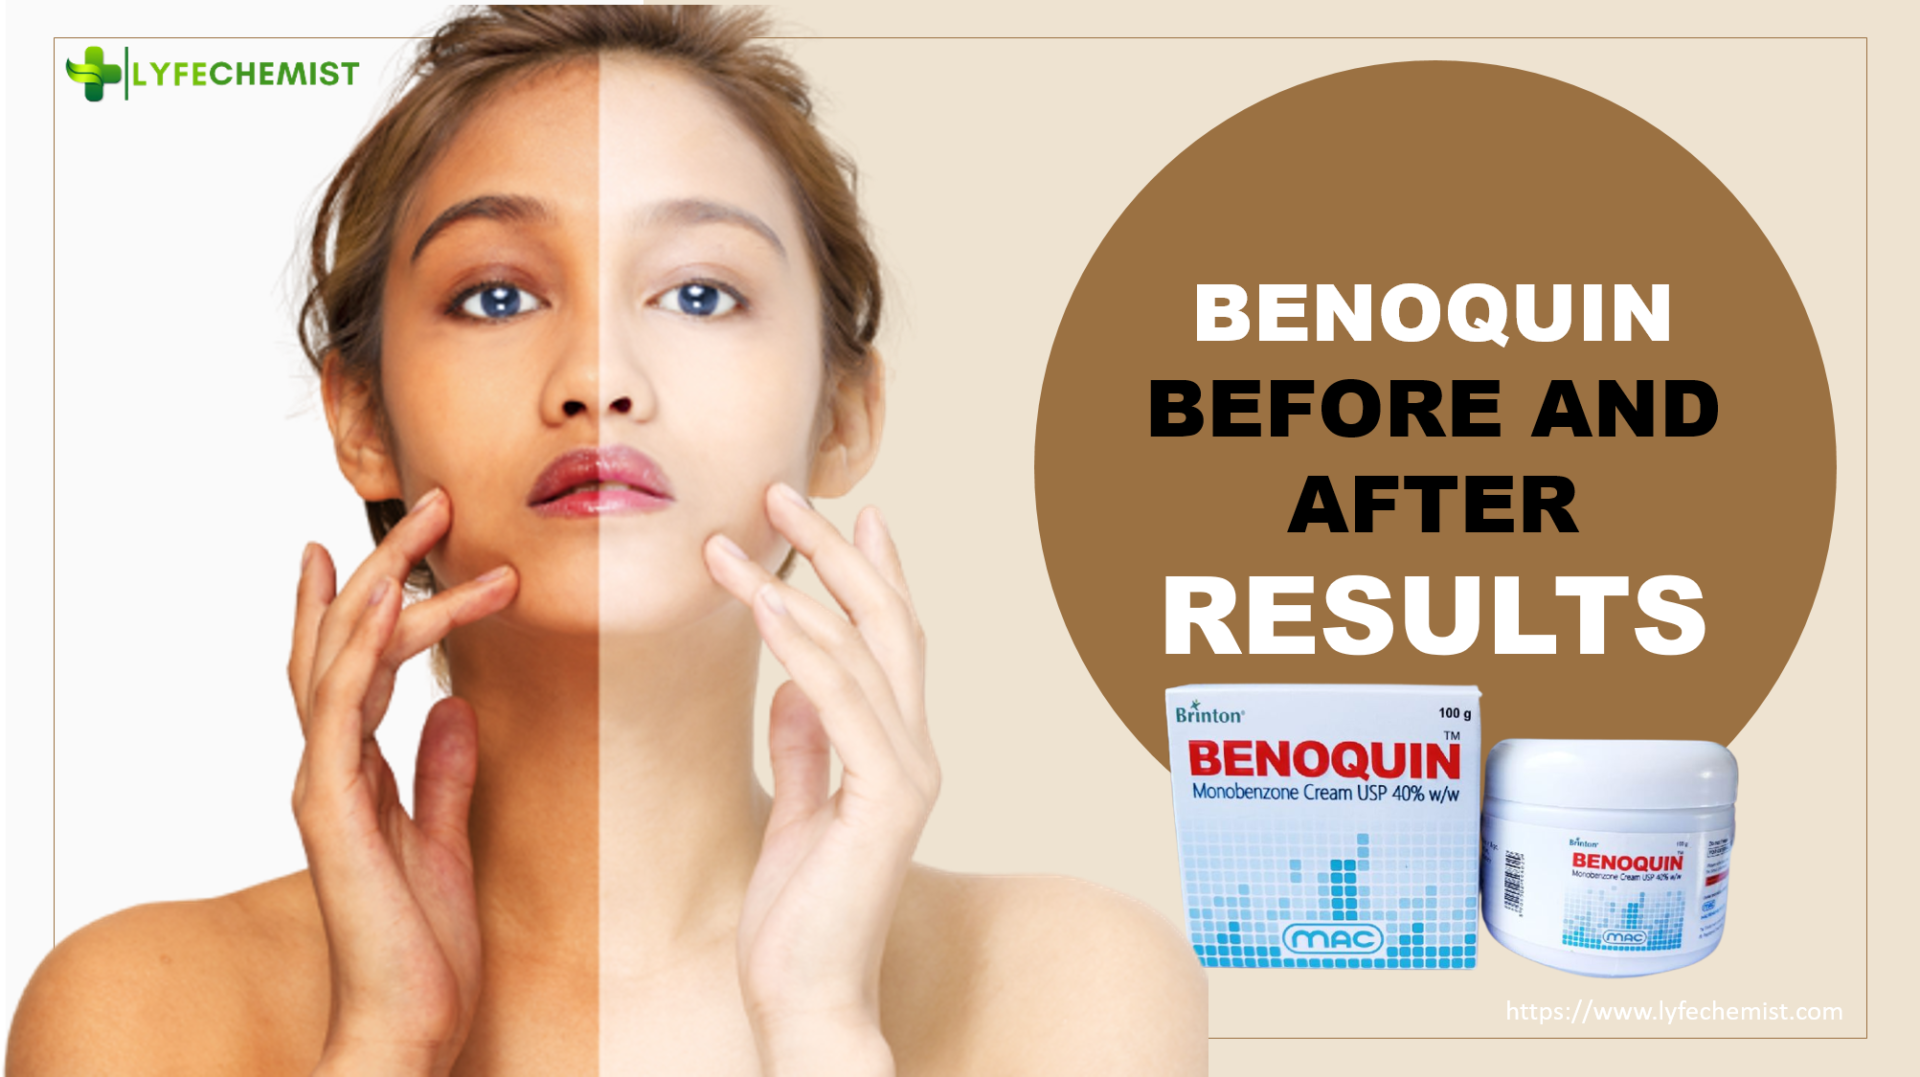 Benoquin before and after results